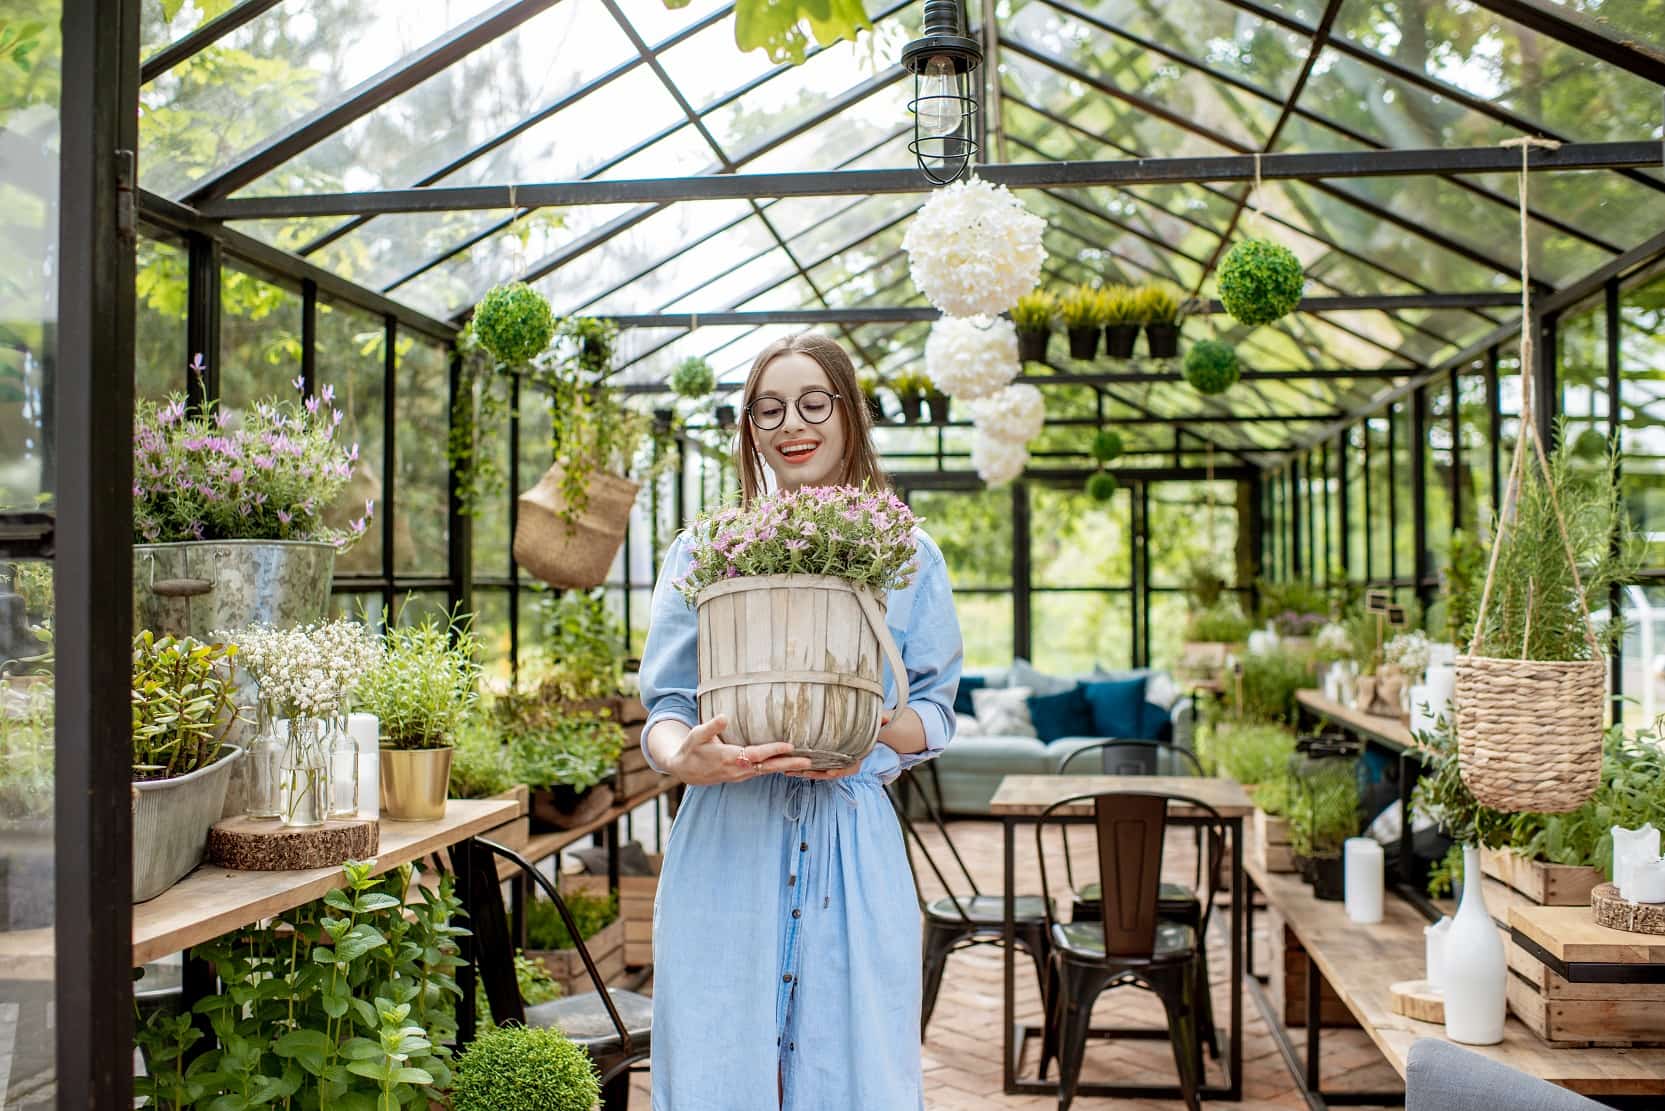 6 Benefits Of Having A Small Greenhouse In Your Home. The girl in the eco space with the bouquet of flowers in the pot